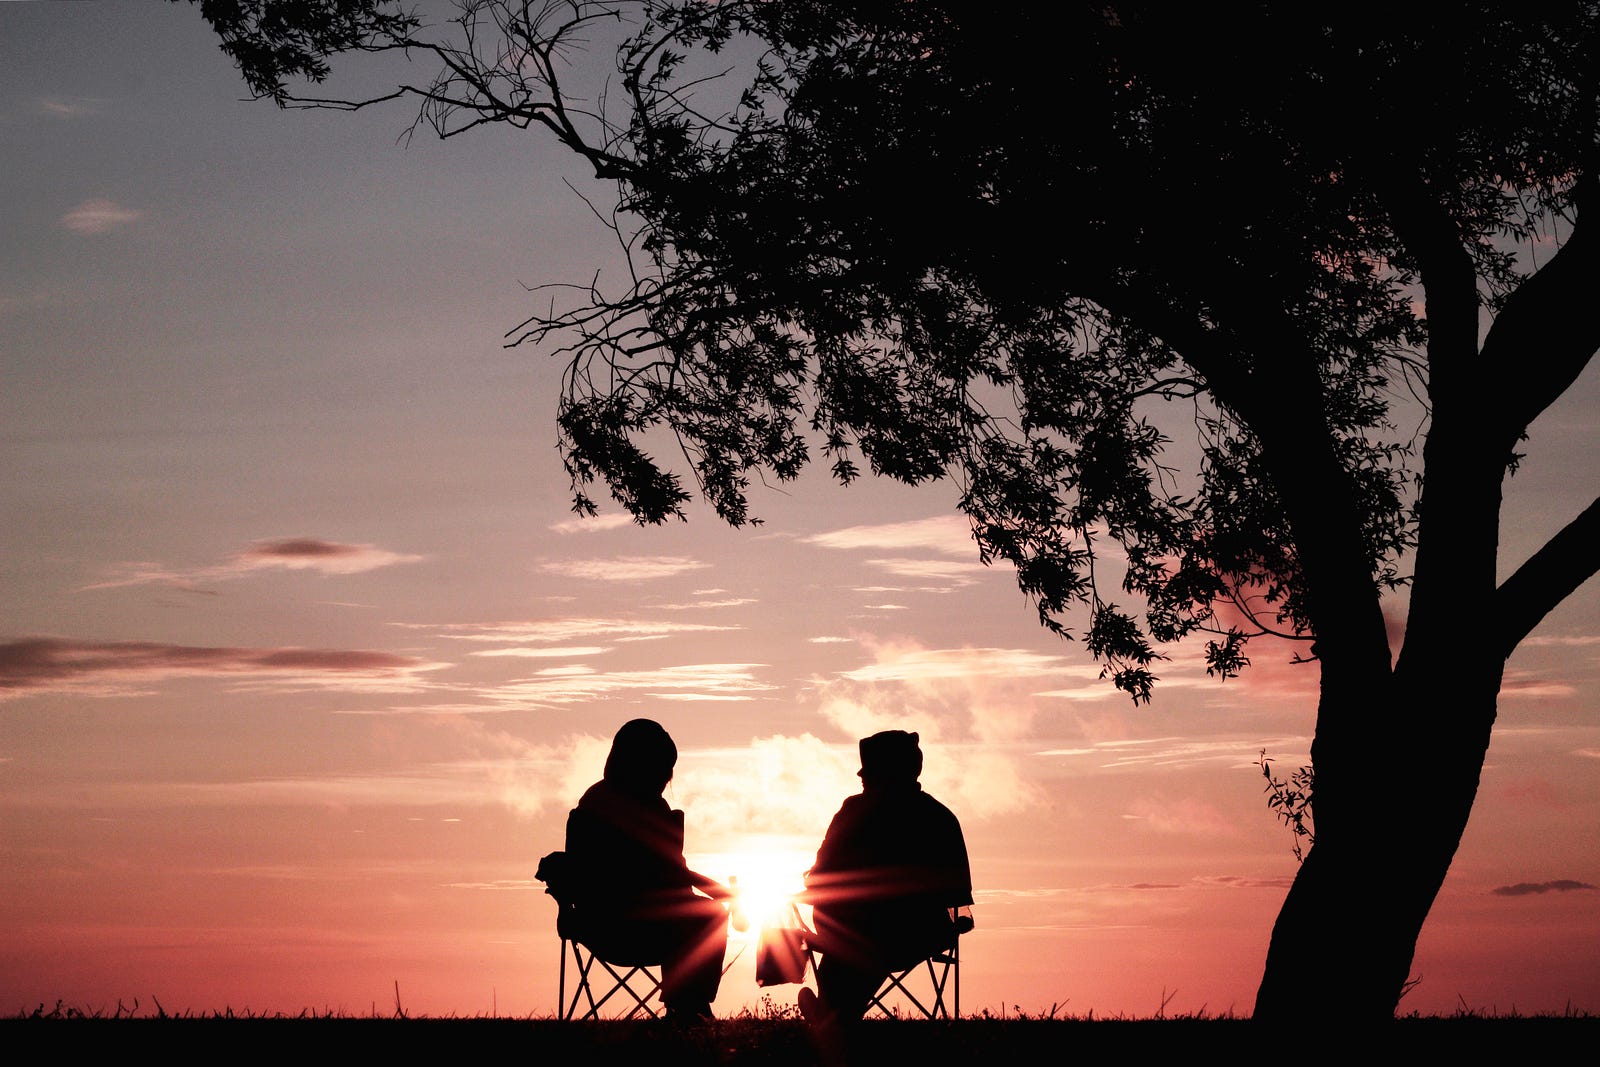 An older couple sits in portable chairs, facing away from us. They are silhouetted against the setting sun. A tree is at image right. Lifestyle appears associated with cognitive decline.